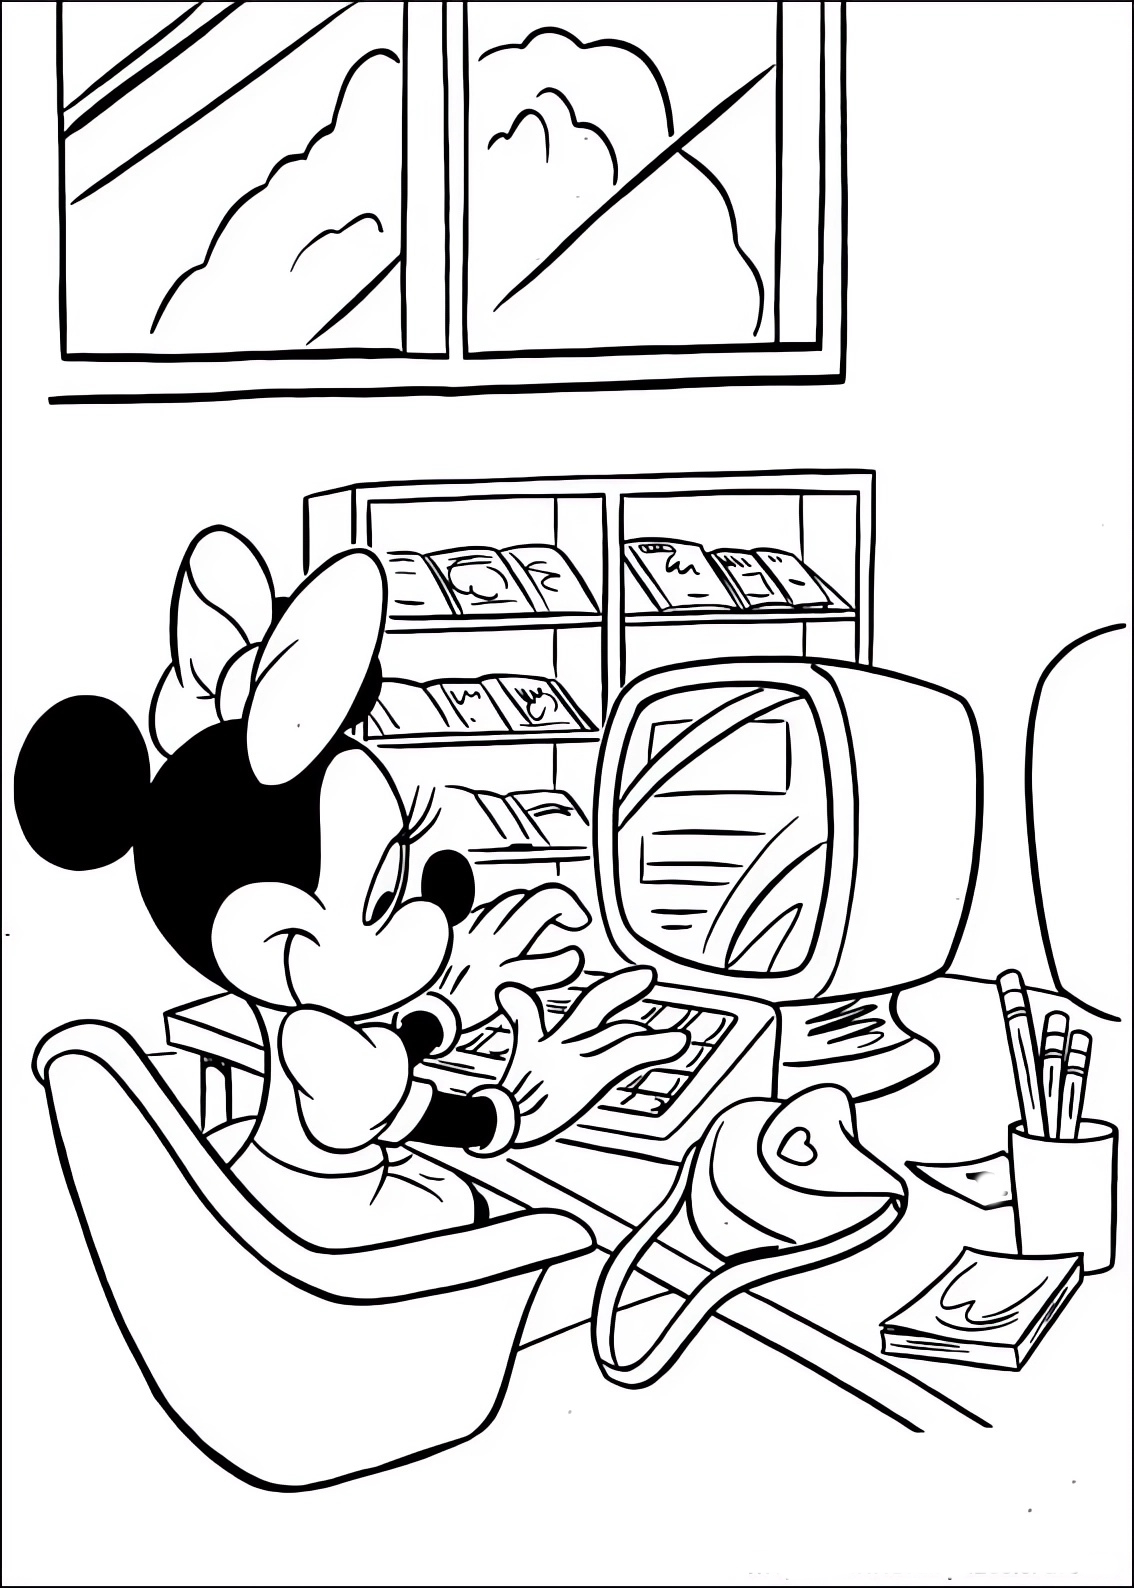 Coloring page of Minnie Mouse working on the computer